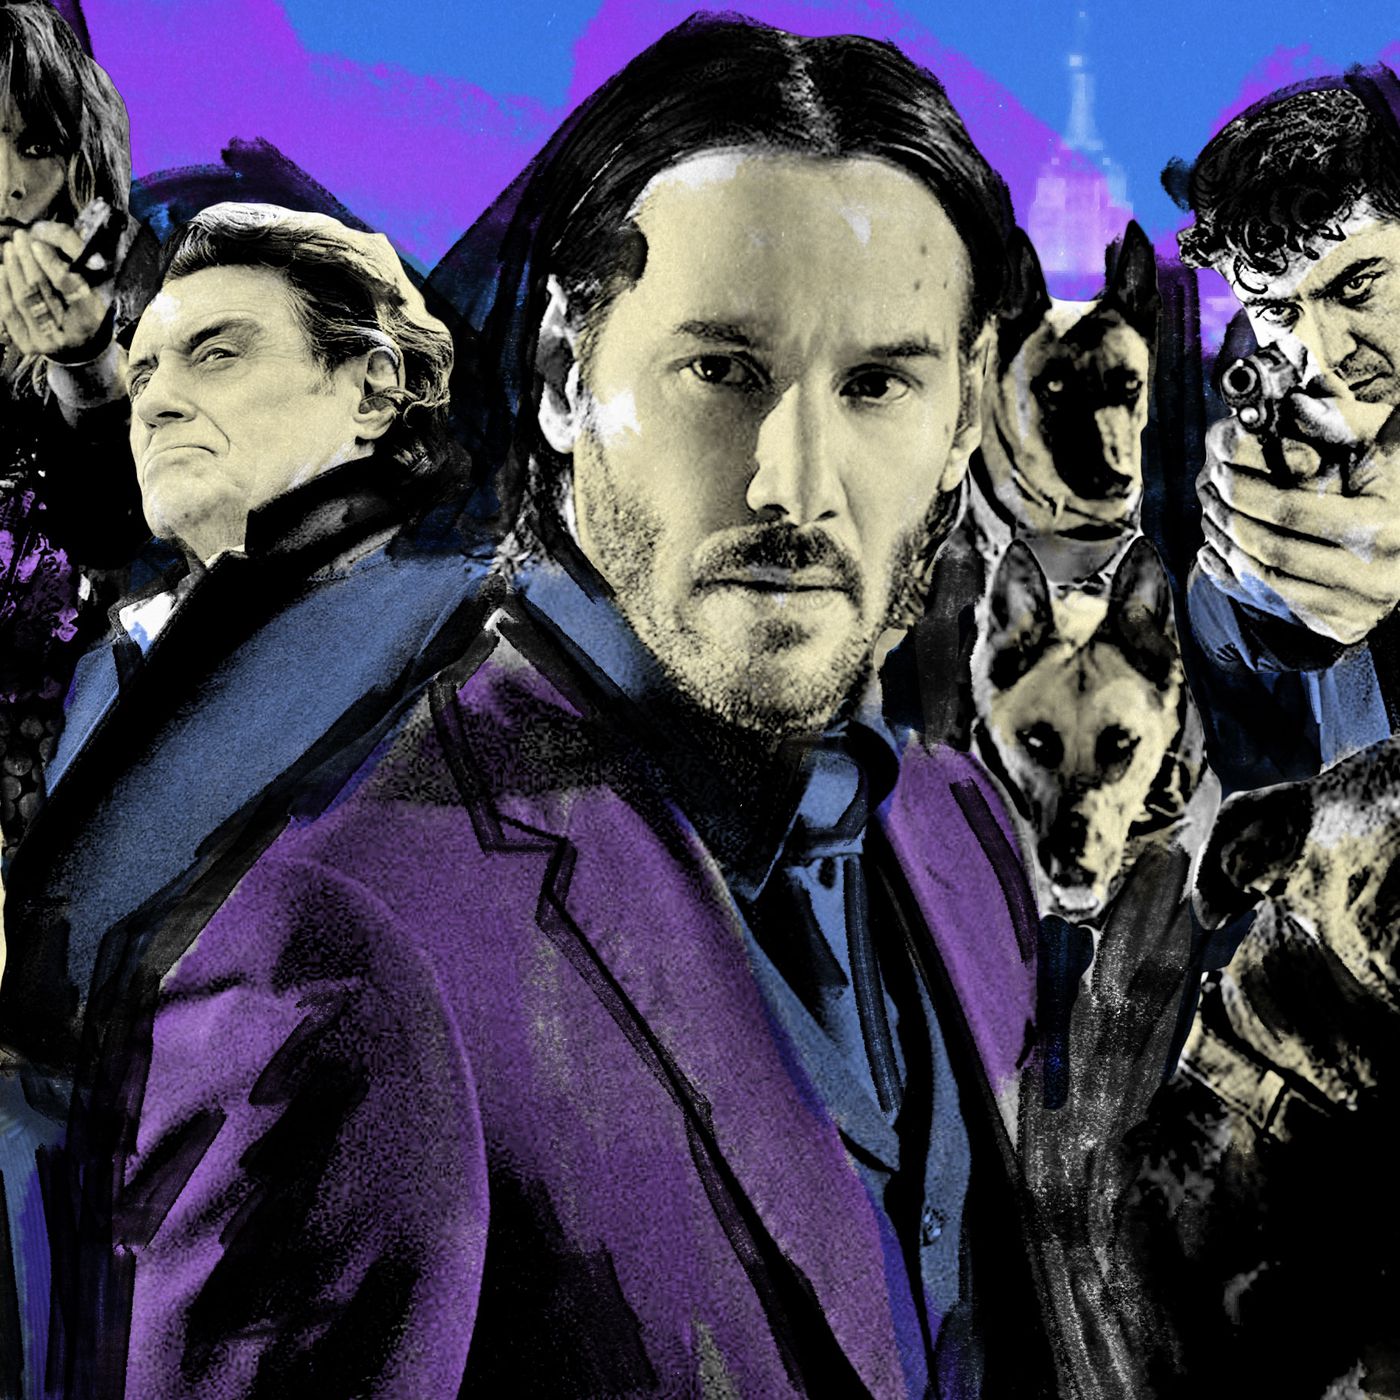 A Complete Guide to the 'John Wick' Universe